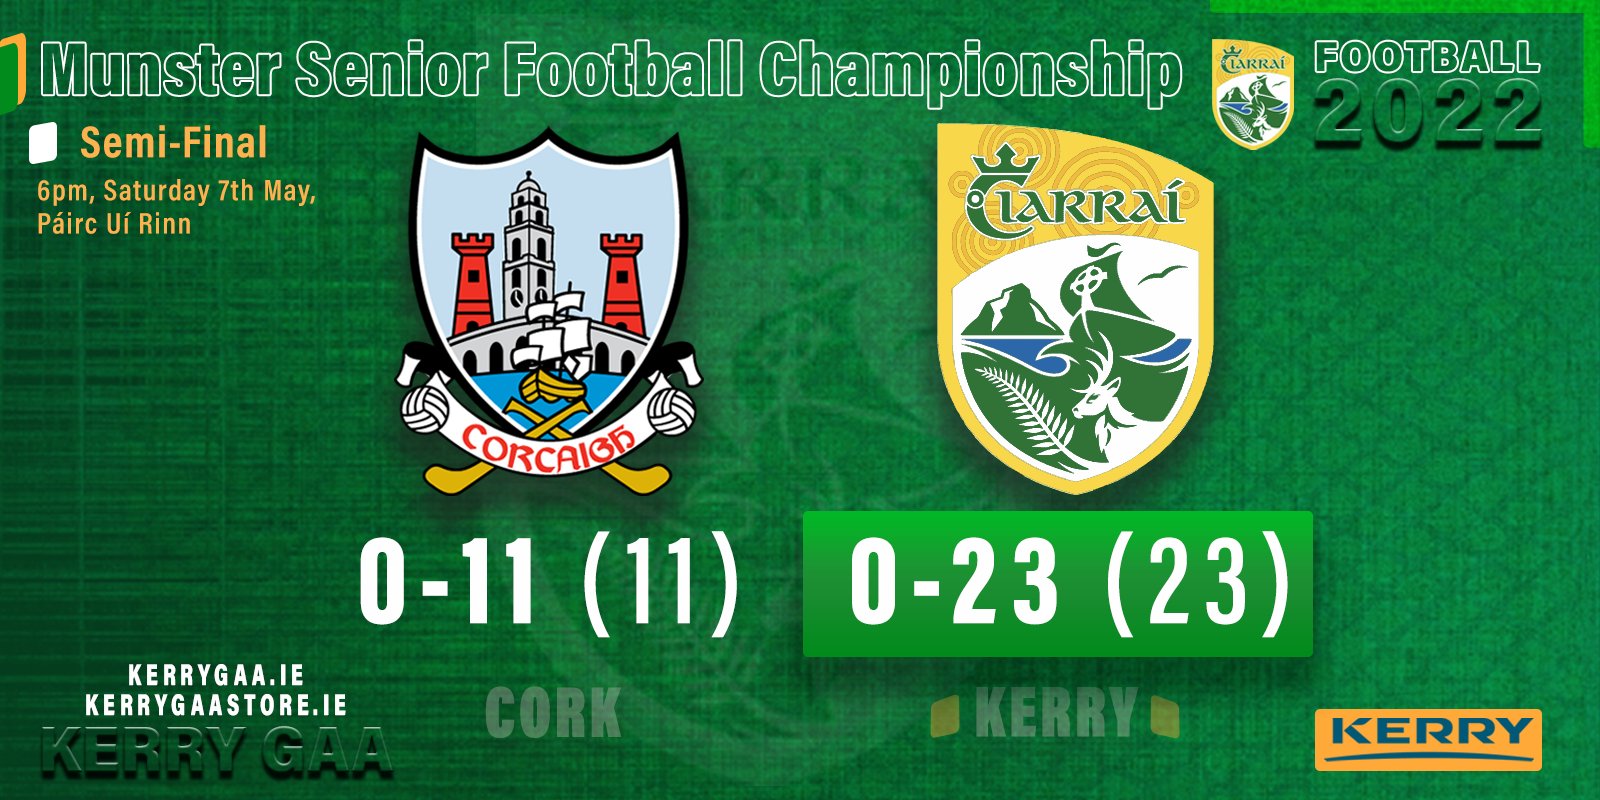 Strong second half sees Kerry through to Munster Final